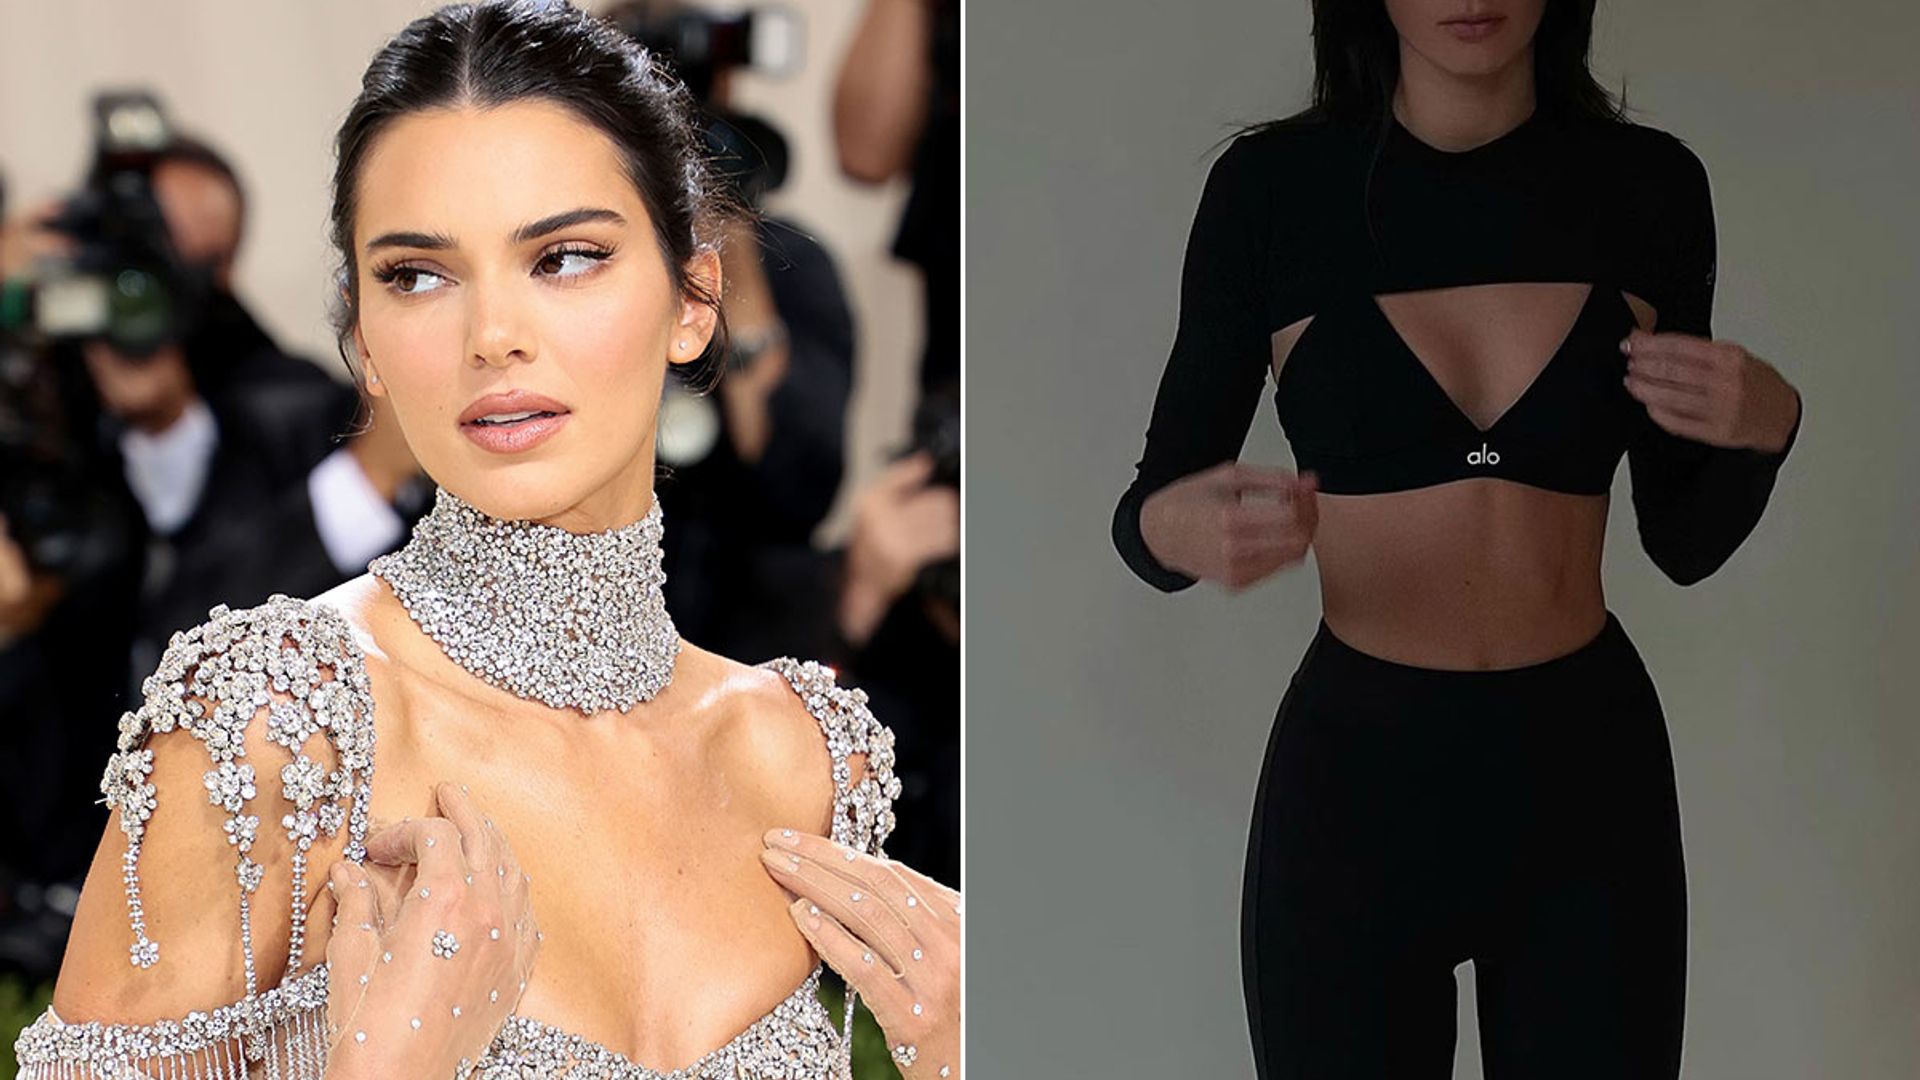 Shop Kendall Jenner's Perfect '80s-Inspired Workout Gear Right Now